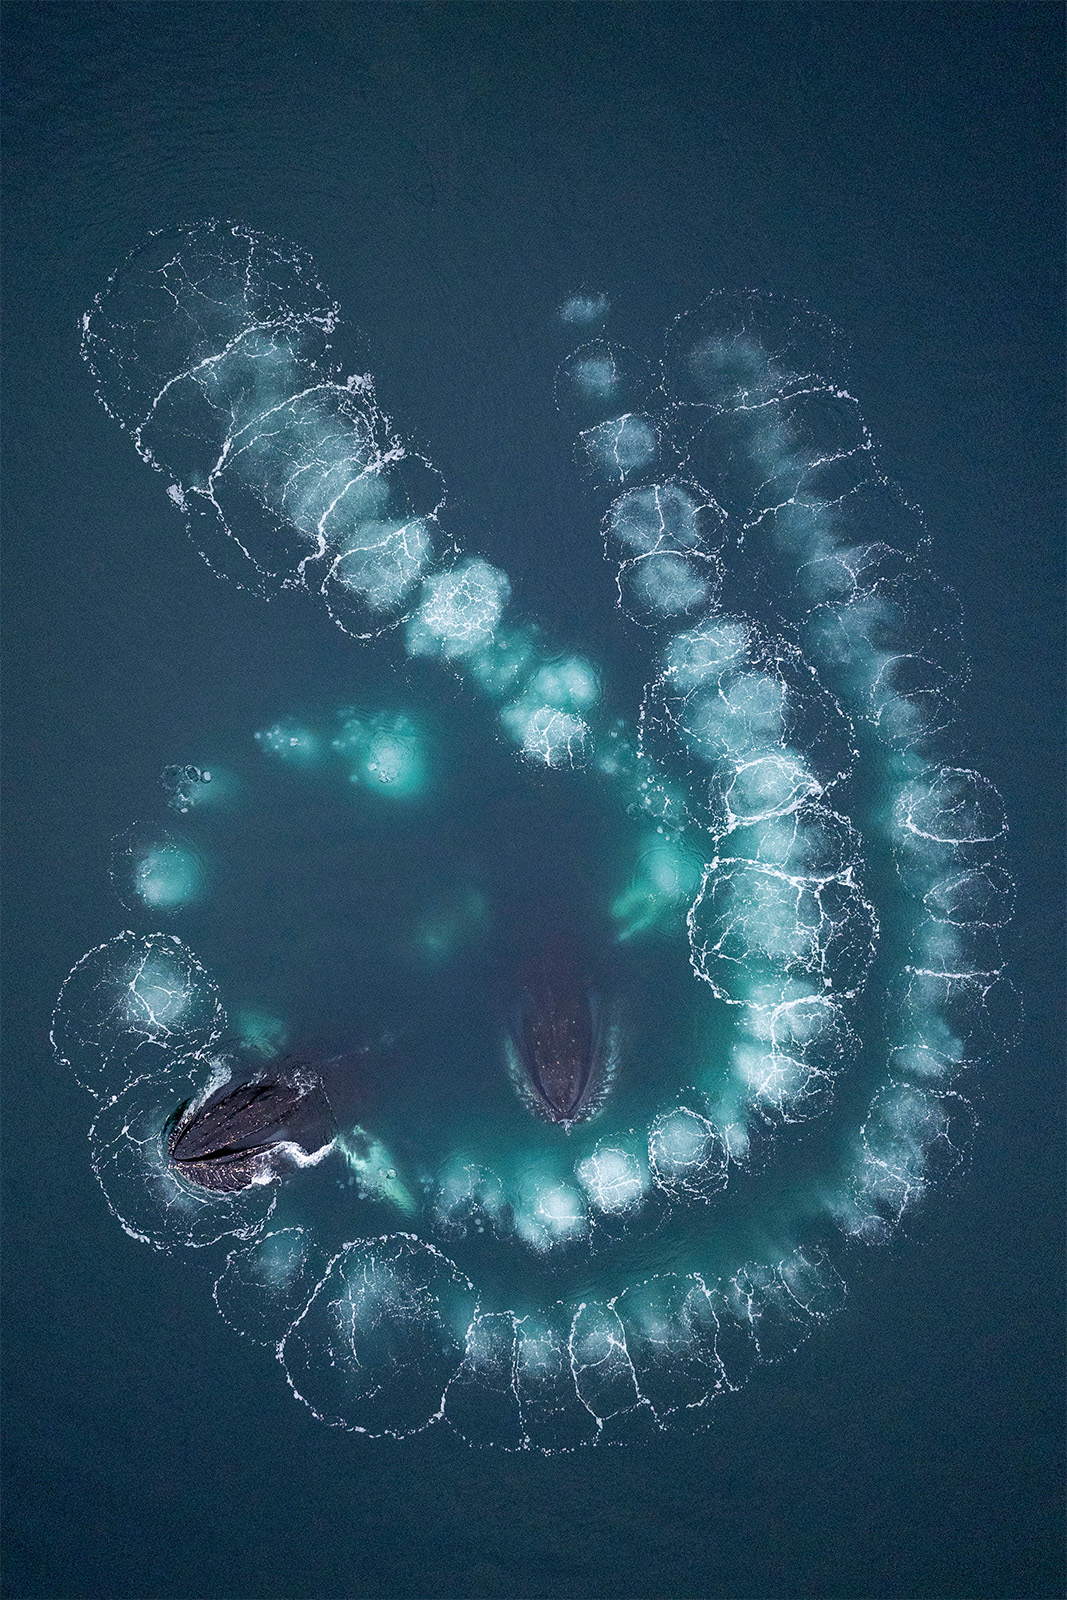 An aerial view of two whales swimming close together in a blue-green ocean. The whales are creating large circular bubble nets, which form intricate, spiraling patterns on the water's surface.